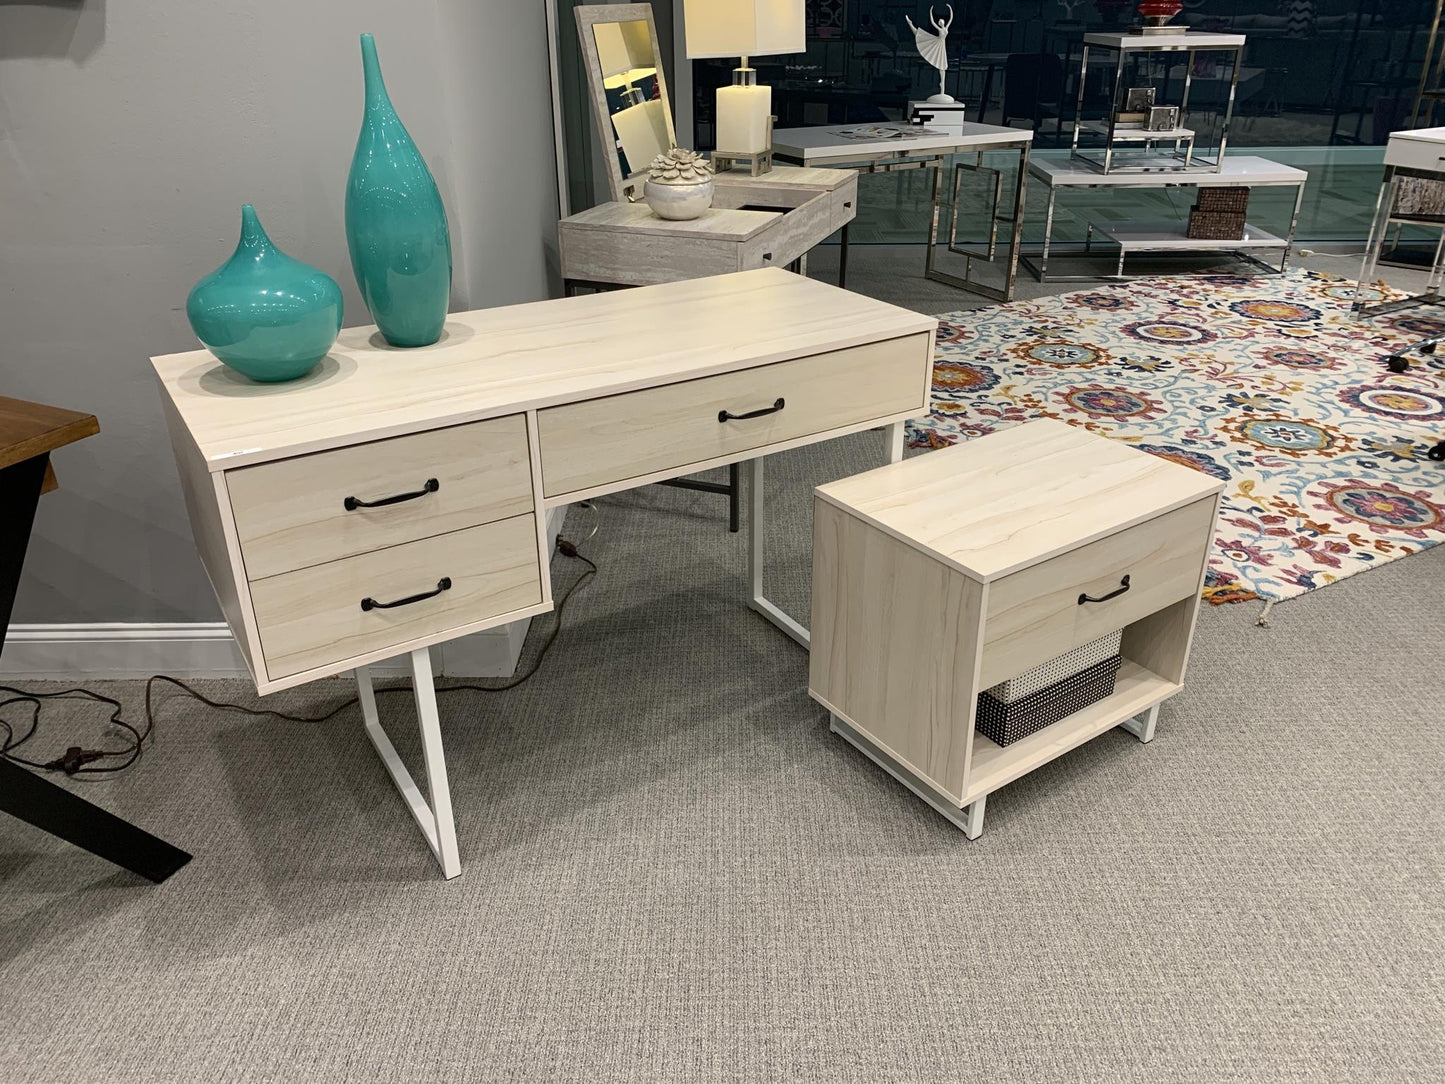 WEEKLY or MONTHLY. Gracy Desk and Side Table